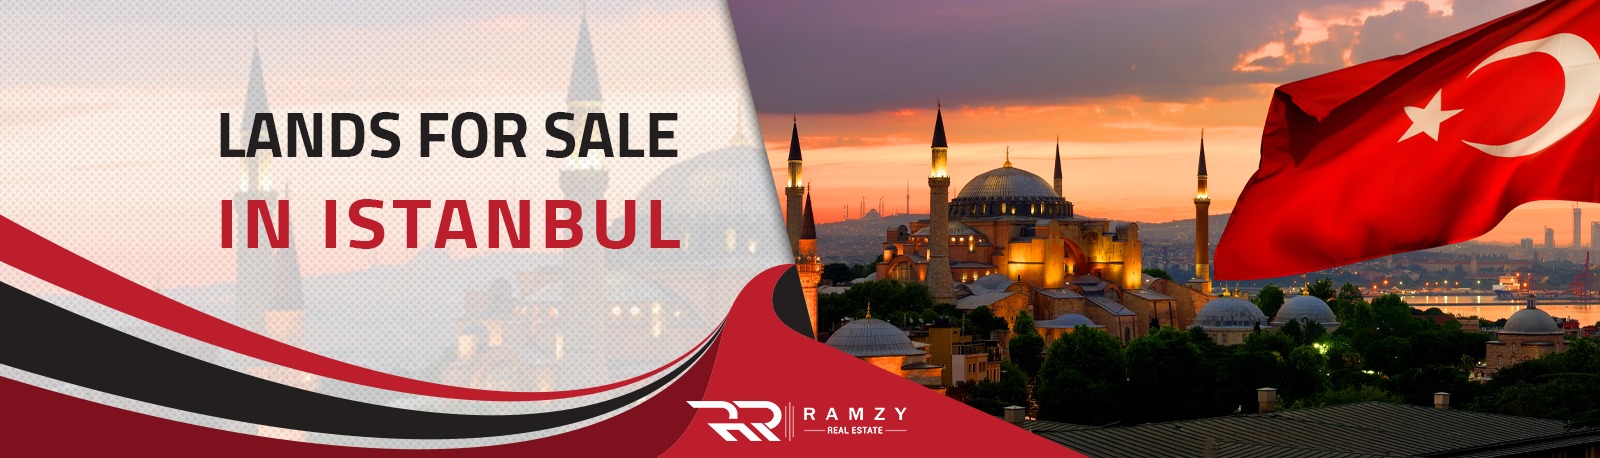 Lands for sale in Istanbul